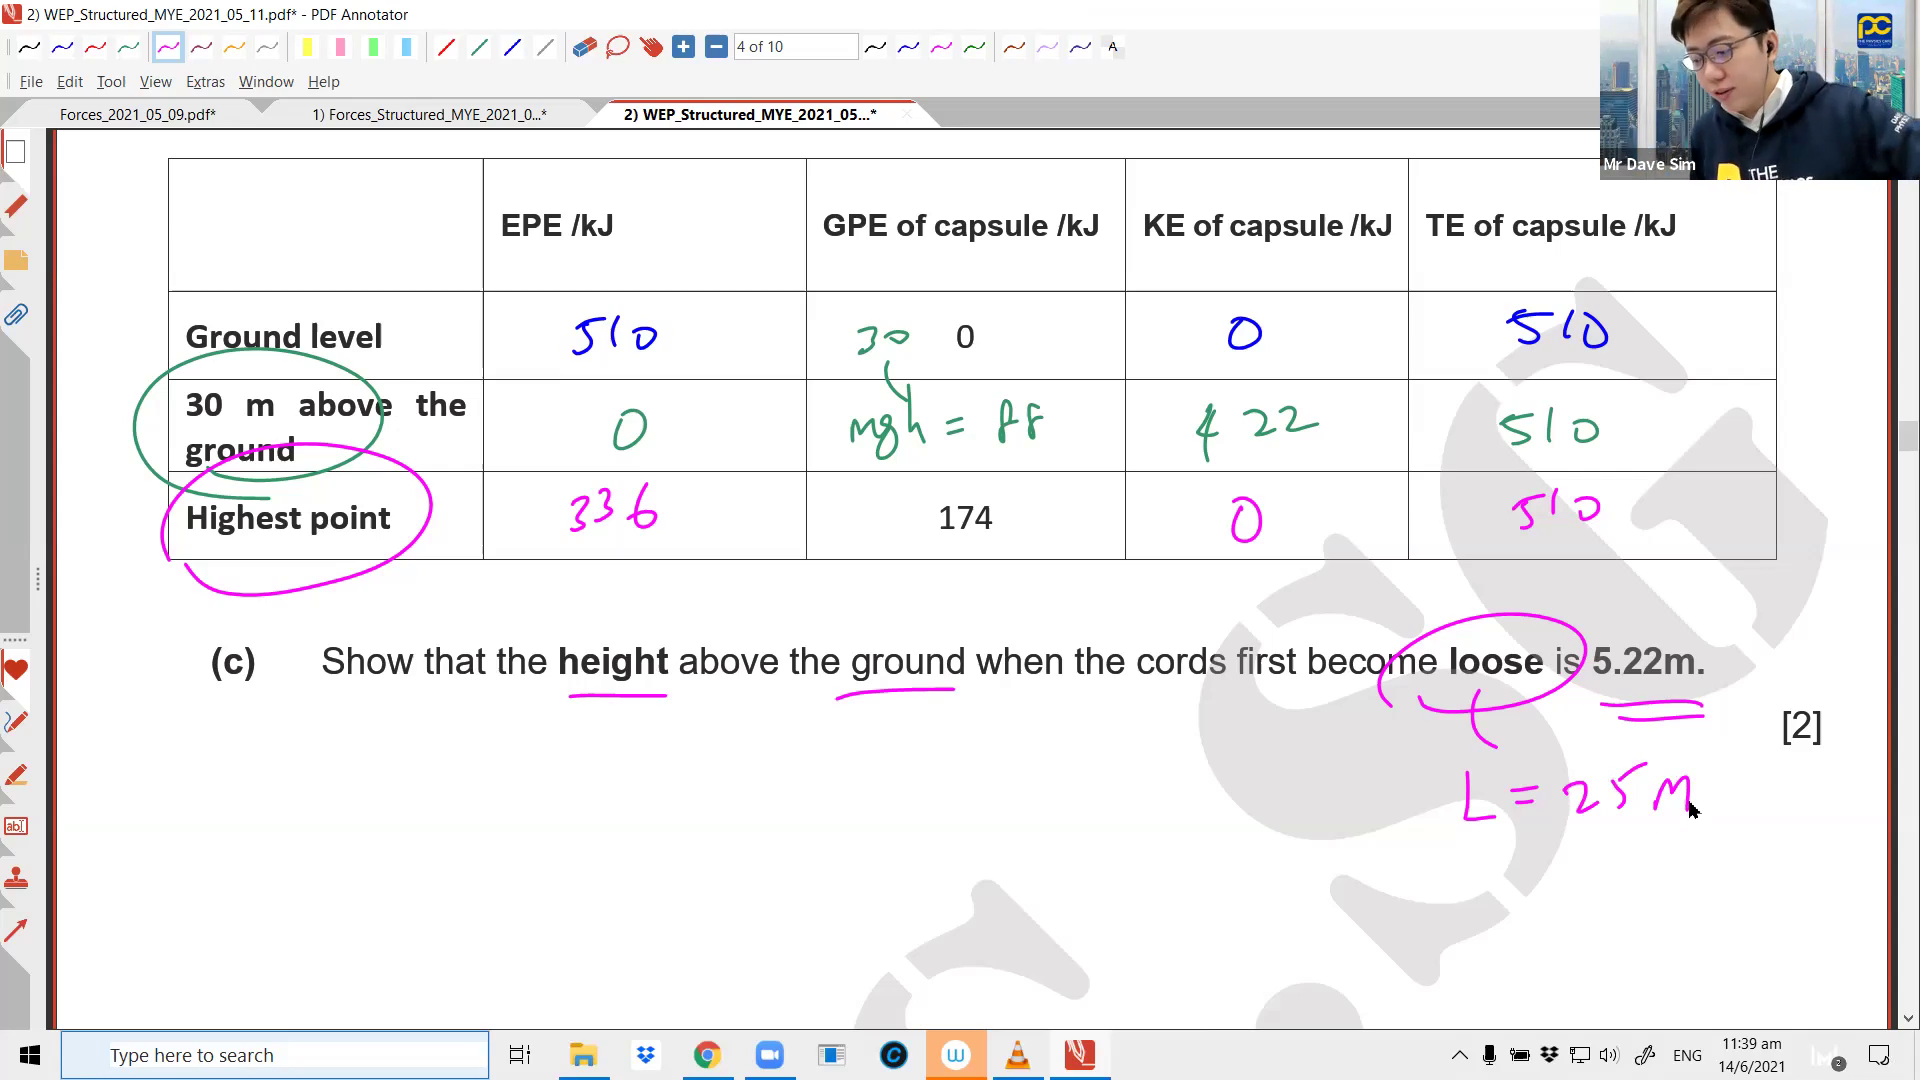 [WEP] Conservation of Energy